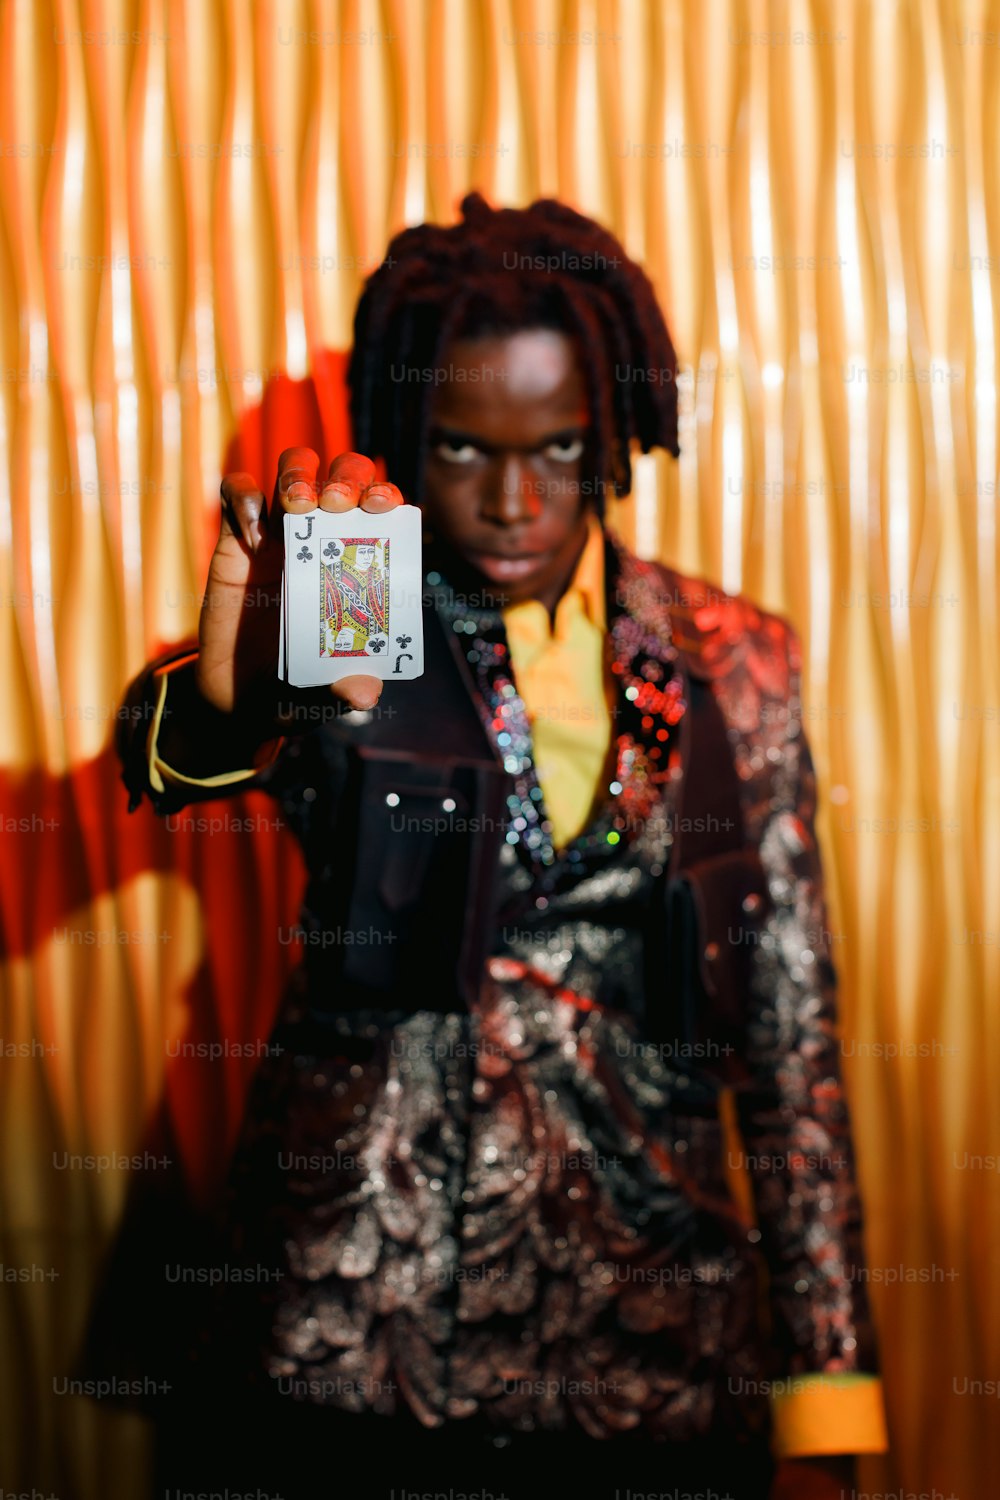 a man with dreadlocks holding up a playing card